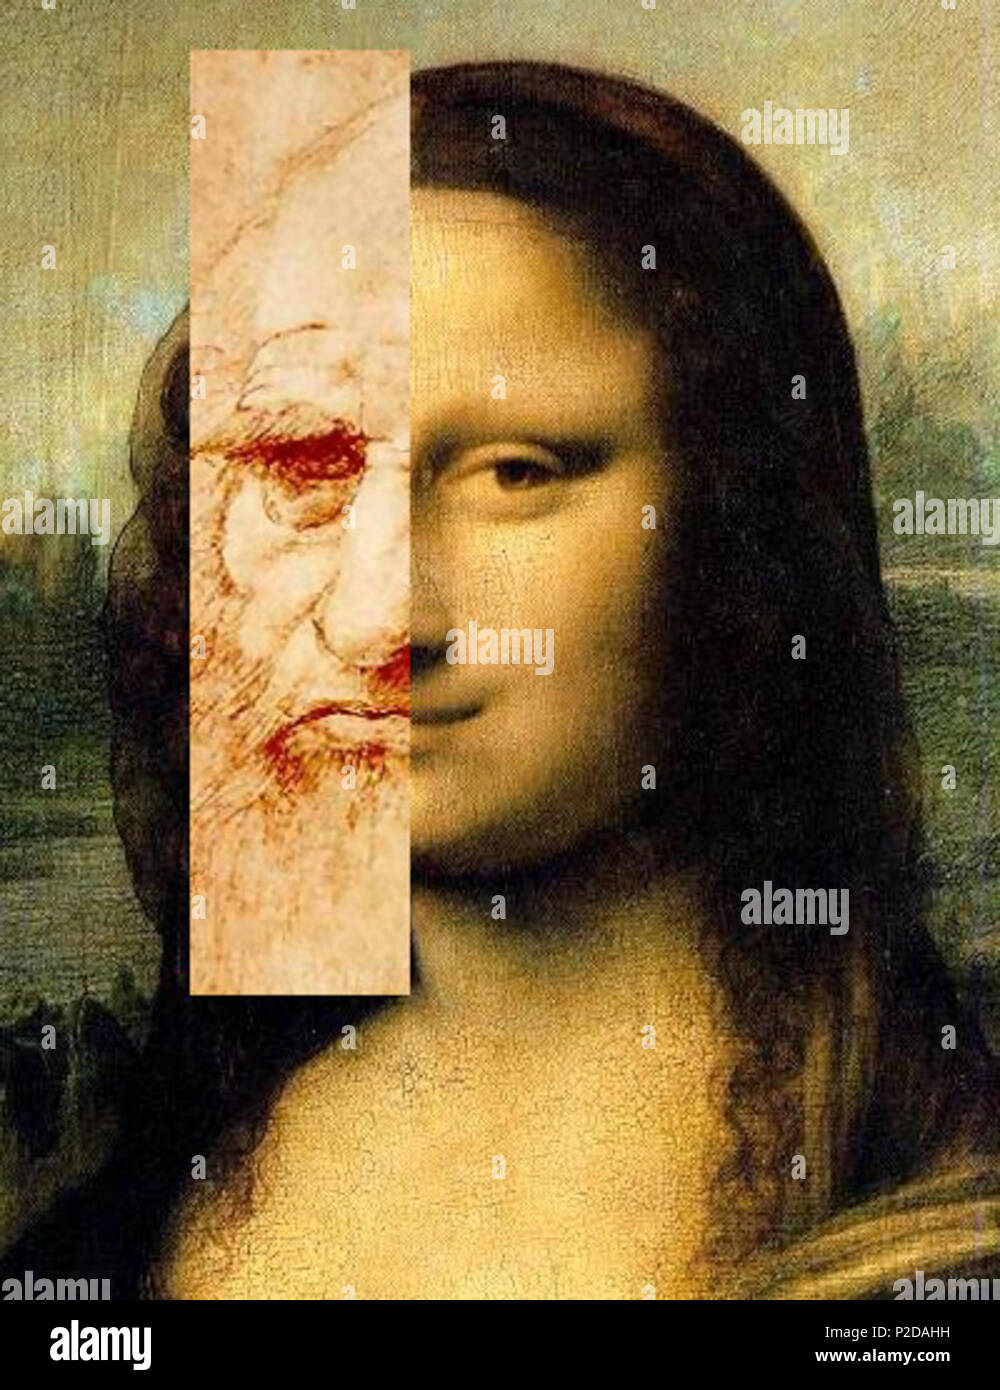 Comparison of Leonardo da Vinci's assumed self-portrait and his Mona Lisa,  based on image manipulation techniques similar to those used by Dr. Lillian  F. Schwartz of Bell Labs for her speculative